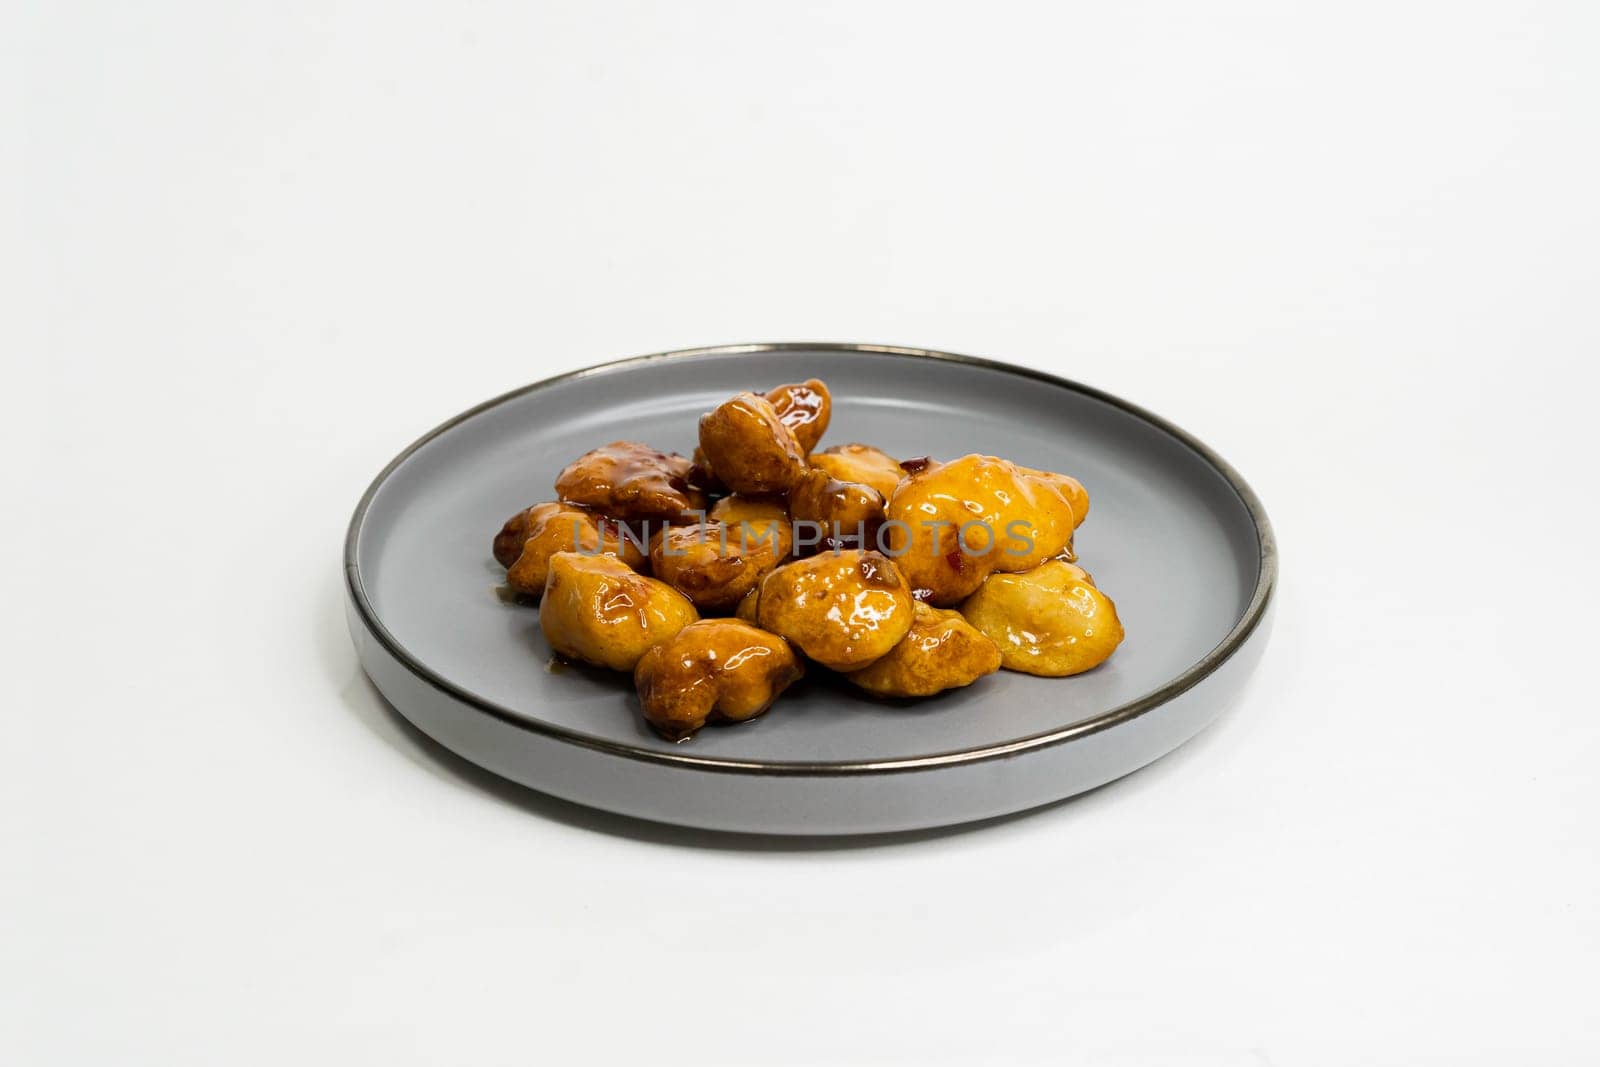 fried chicken nuggets in sauce in a flat plate on a white background side view by tewolf